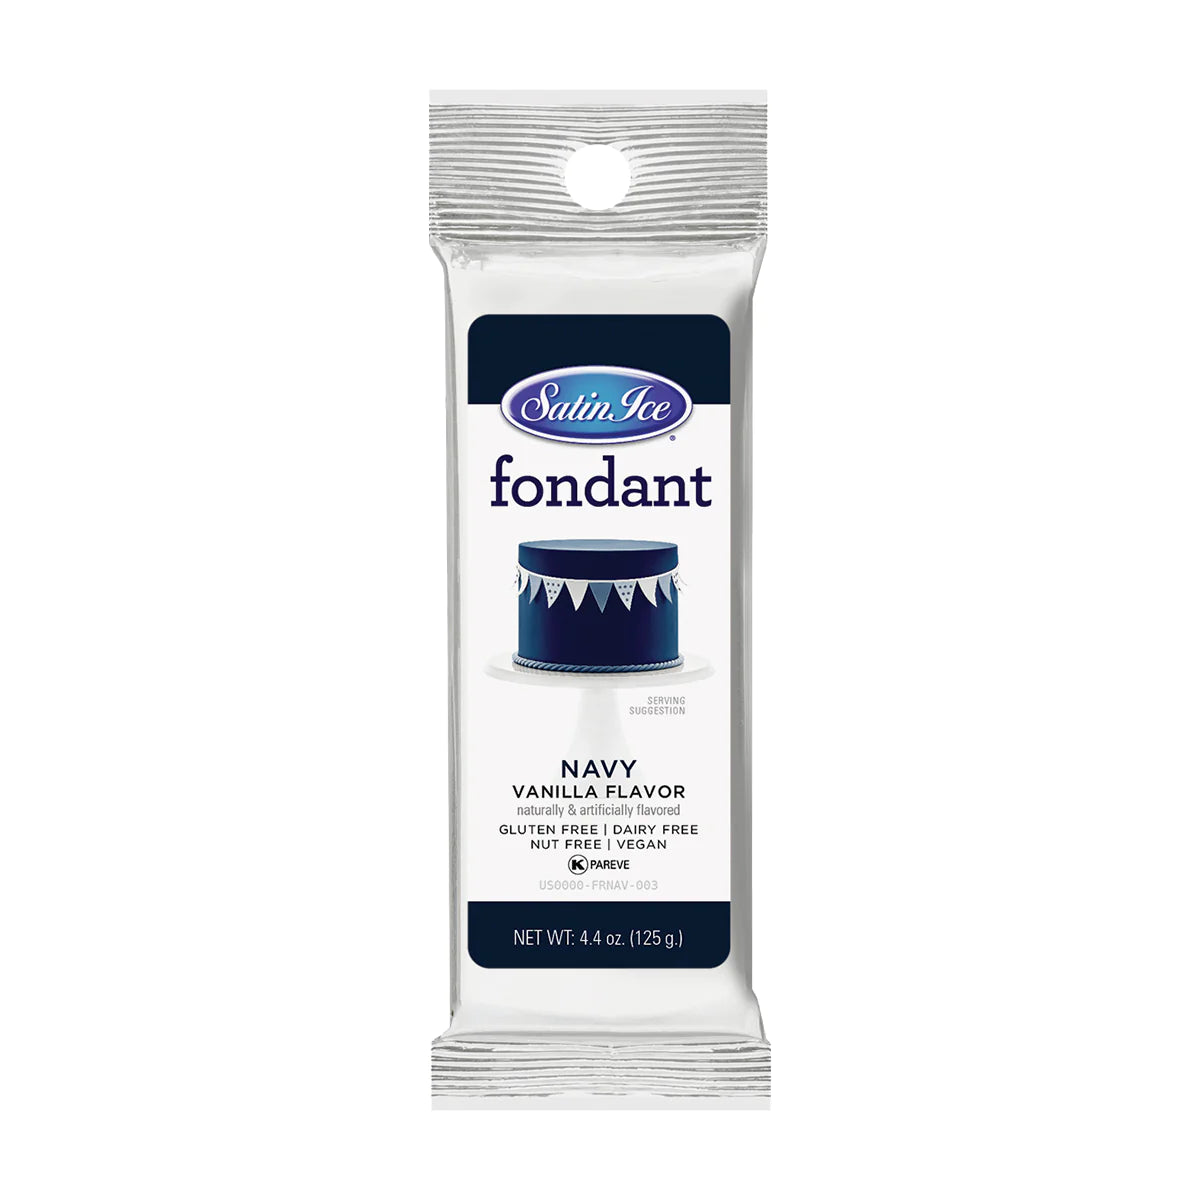 Navy Colored and Vanilla Flavored Fondant in a 4.4 Ounce Foil Pouch